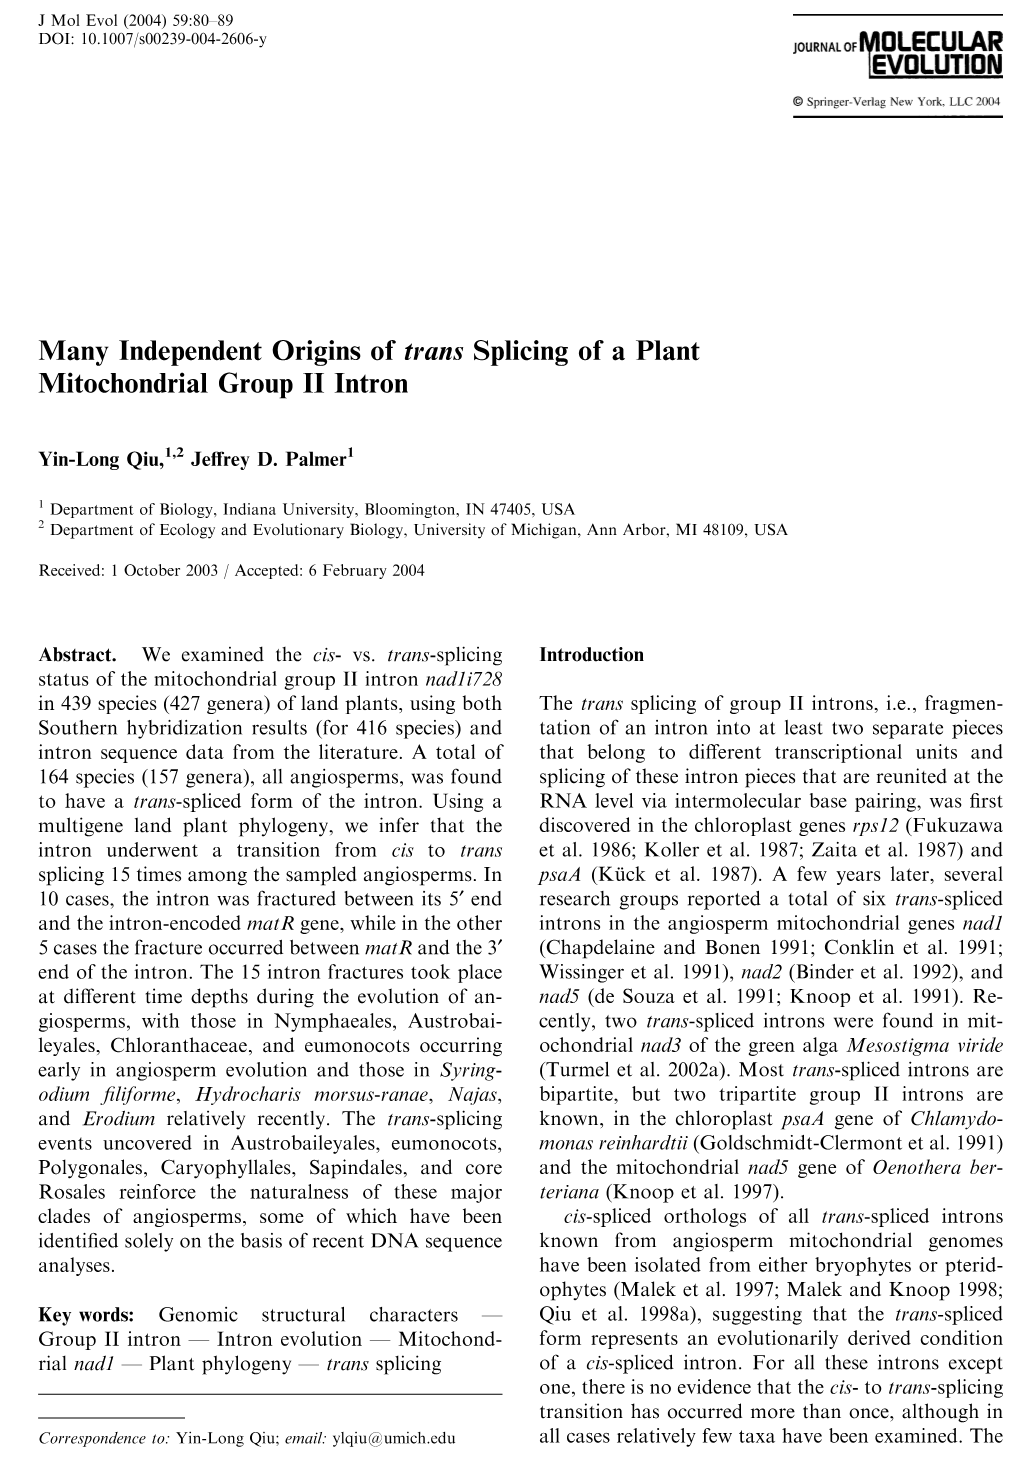 Many Independent Origins of Trans Splicing of a Plant Mitochondrial Group II Intron